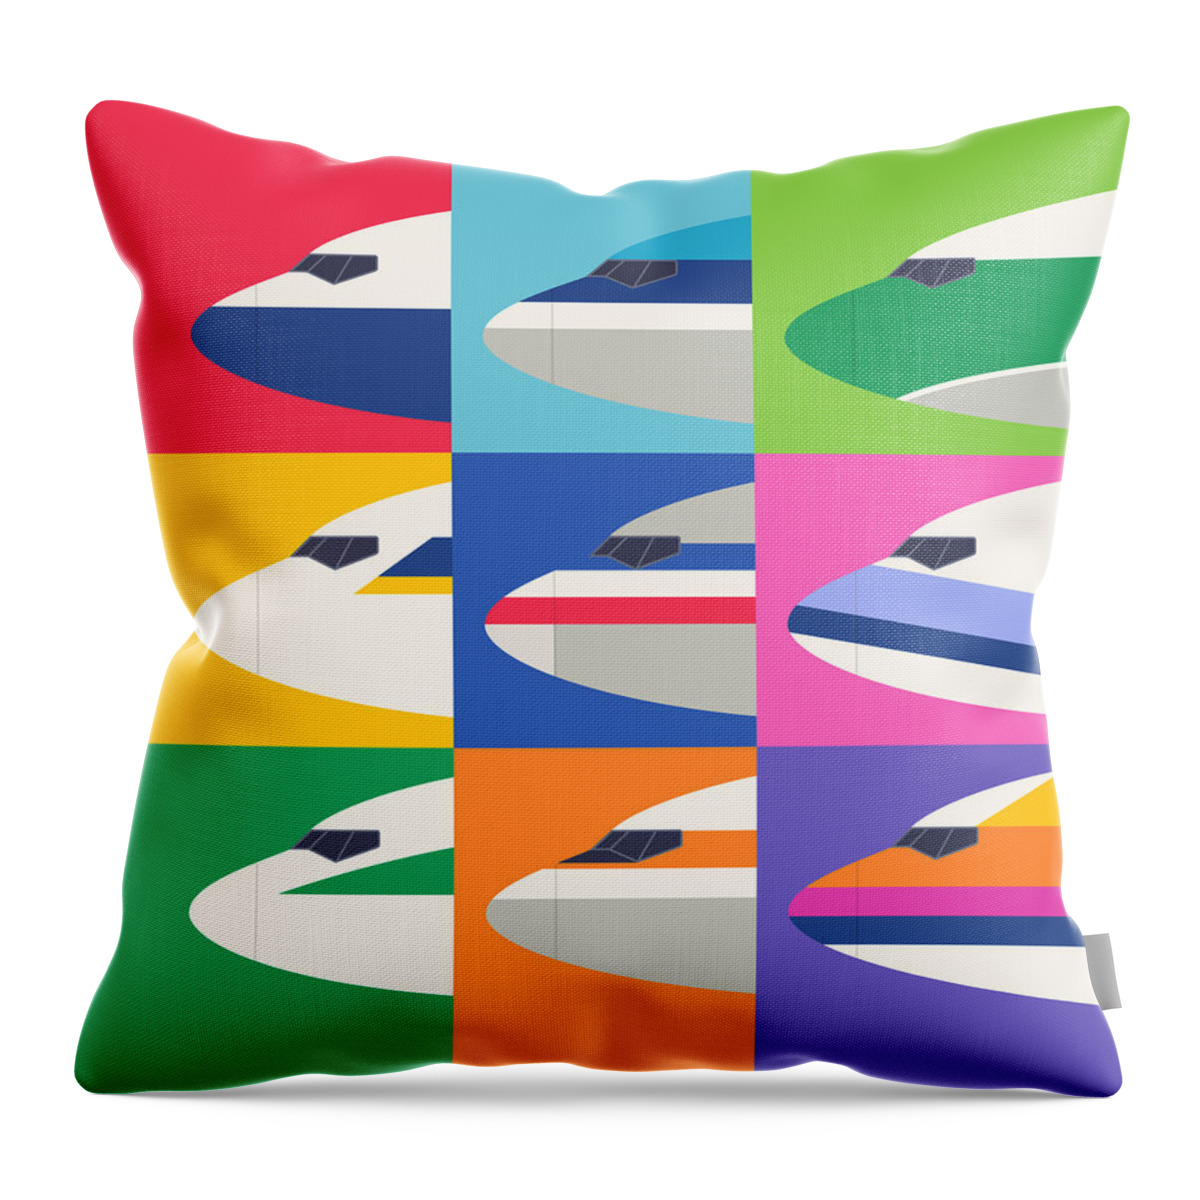 Airline Throw Pillow featuring the digital art Airline Livery Minimal - International by Organic Synthesis